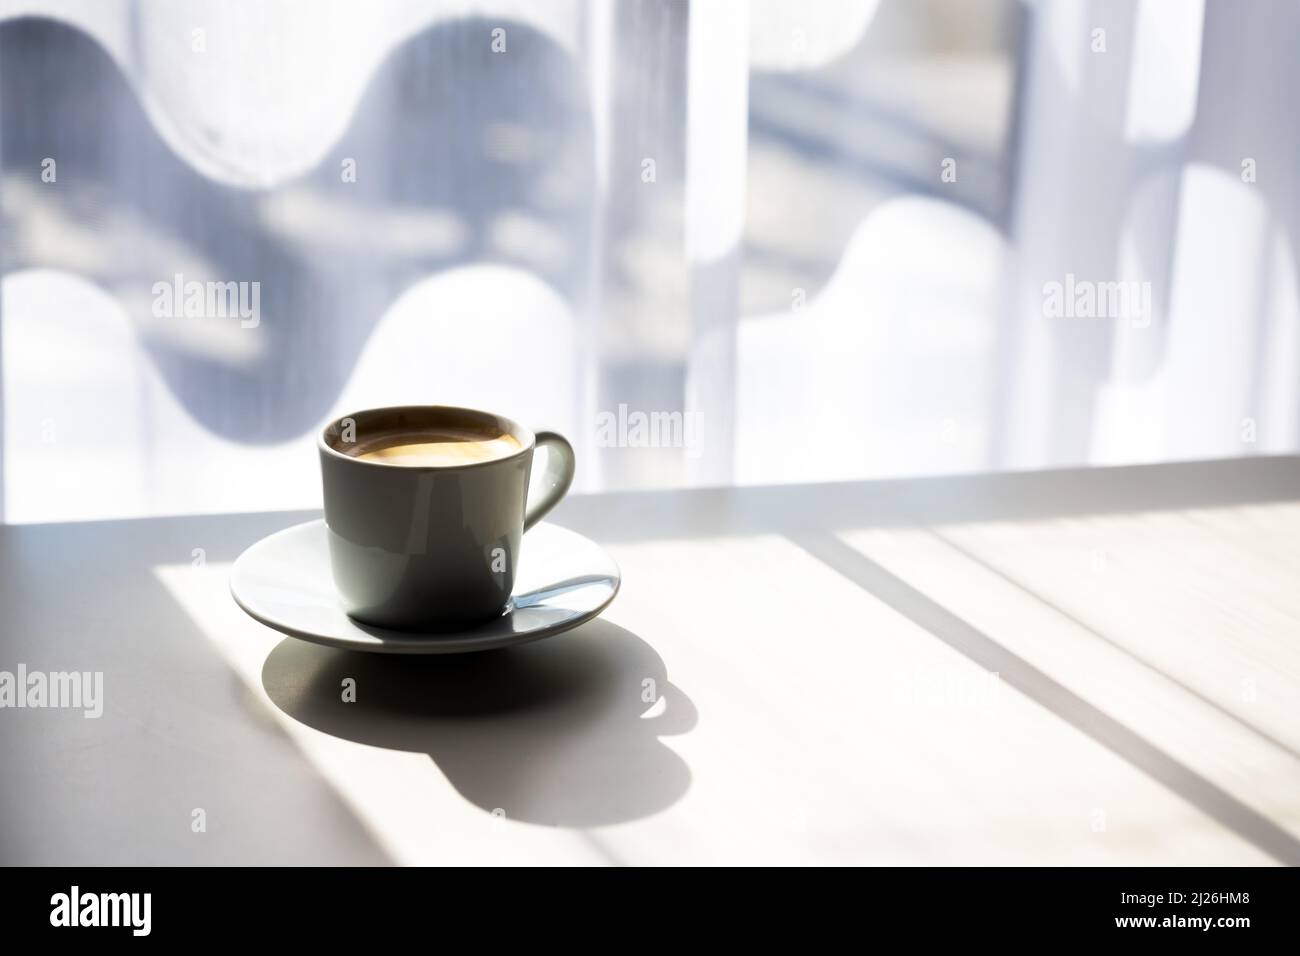 Espresso coffee cup on table near window with morning light. Food and drink photography Stock Photo